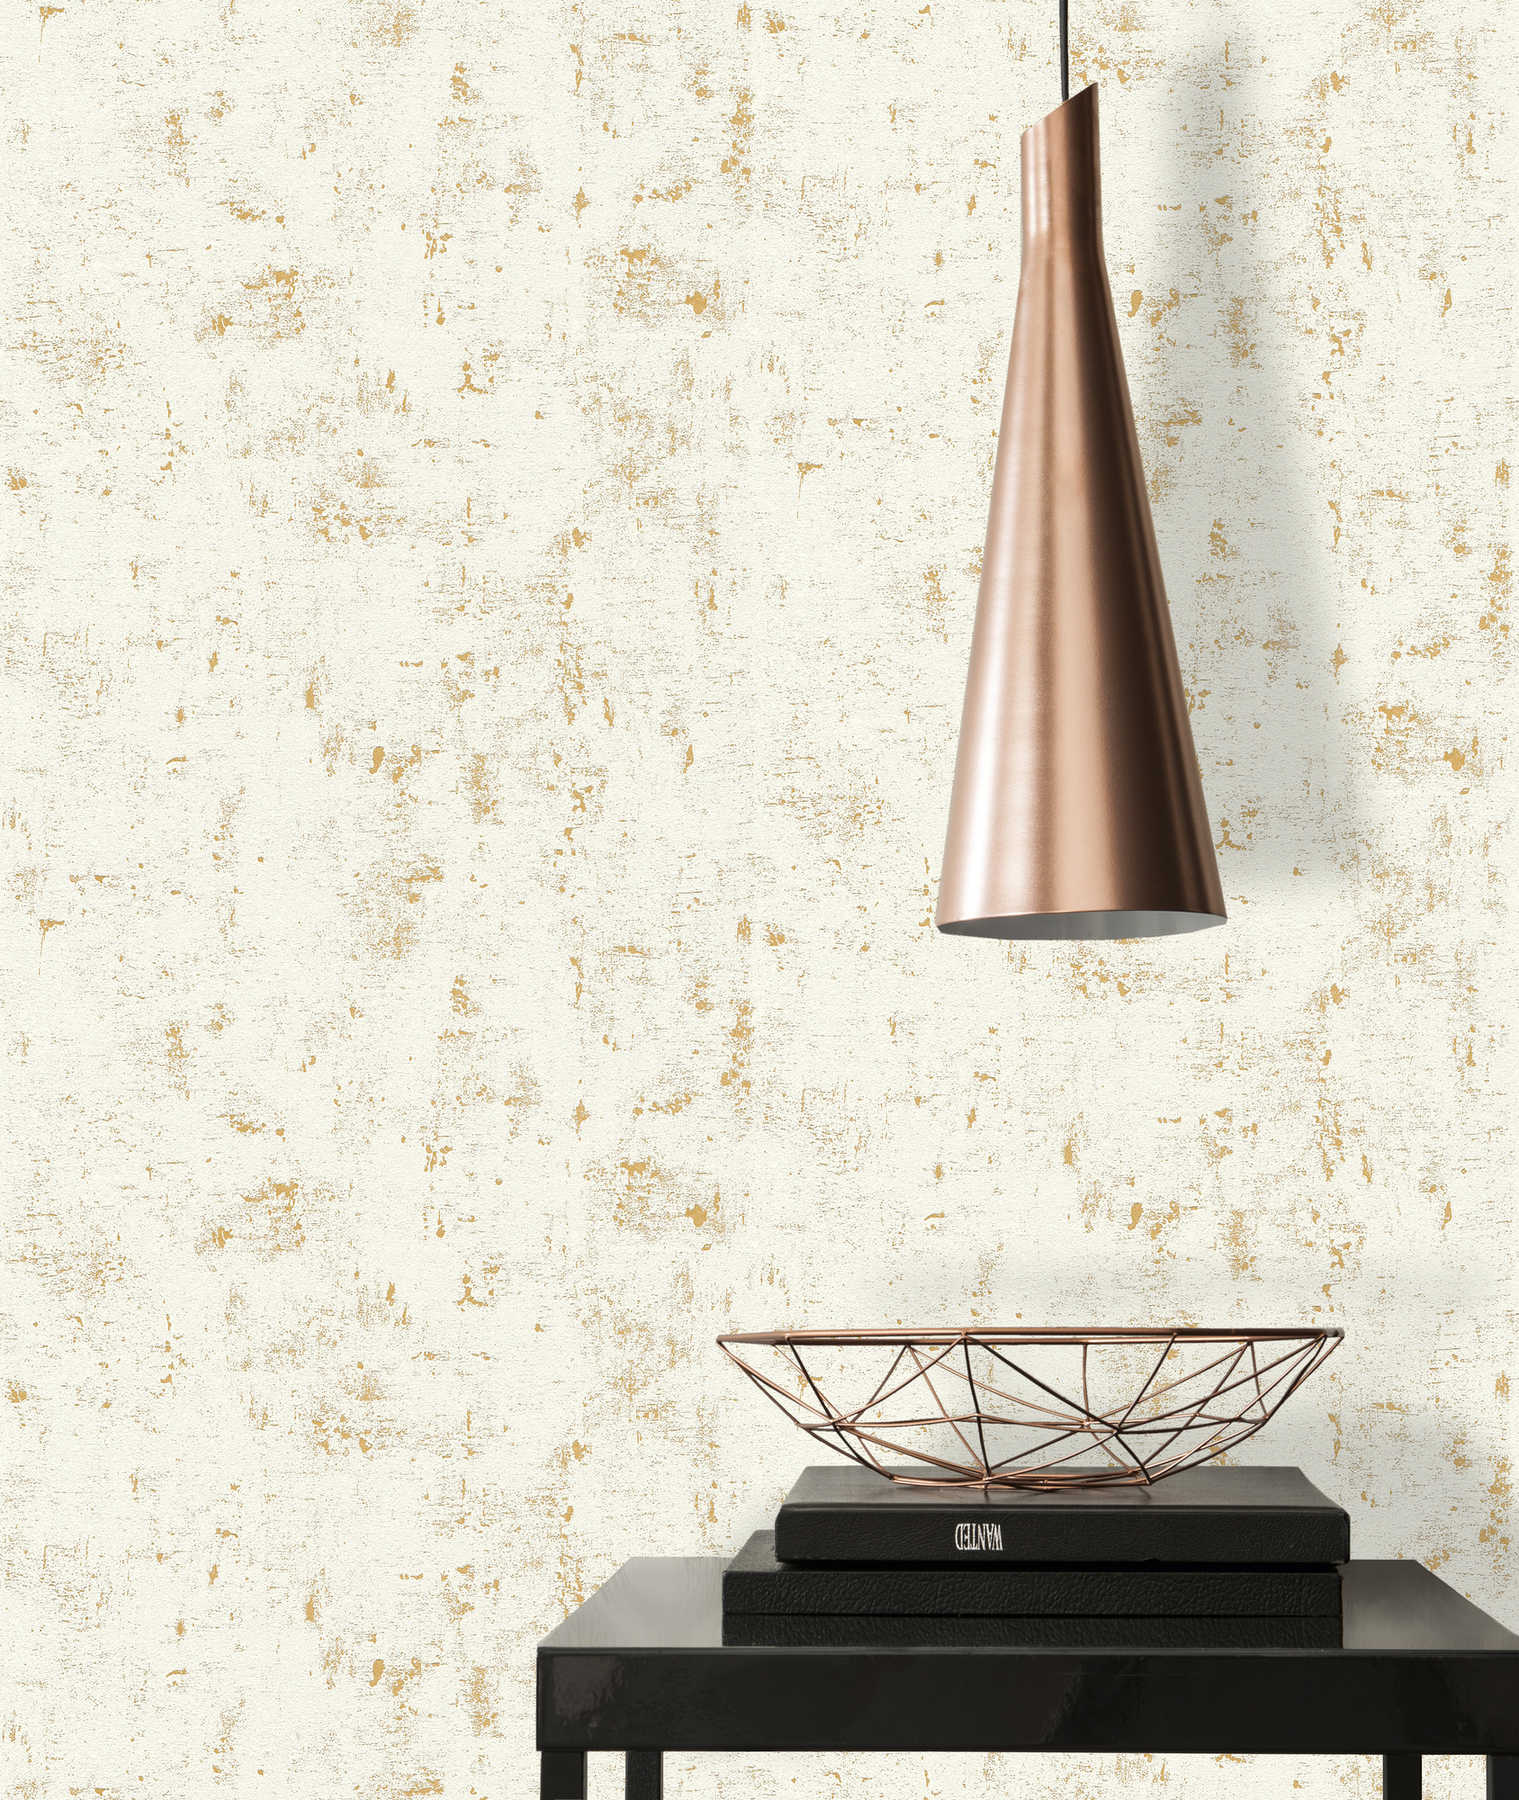             Used look wallpaper with metallic effect - cream, gold
        